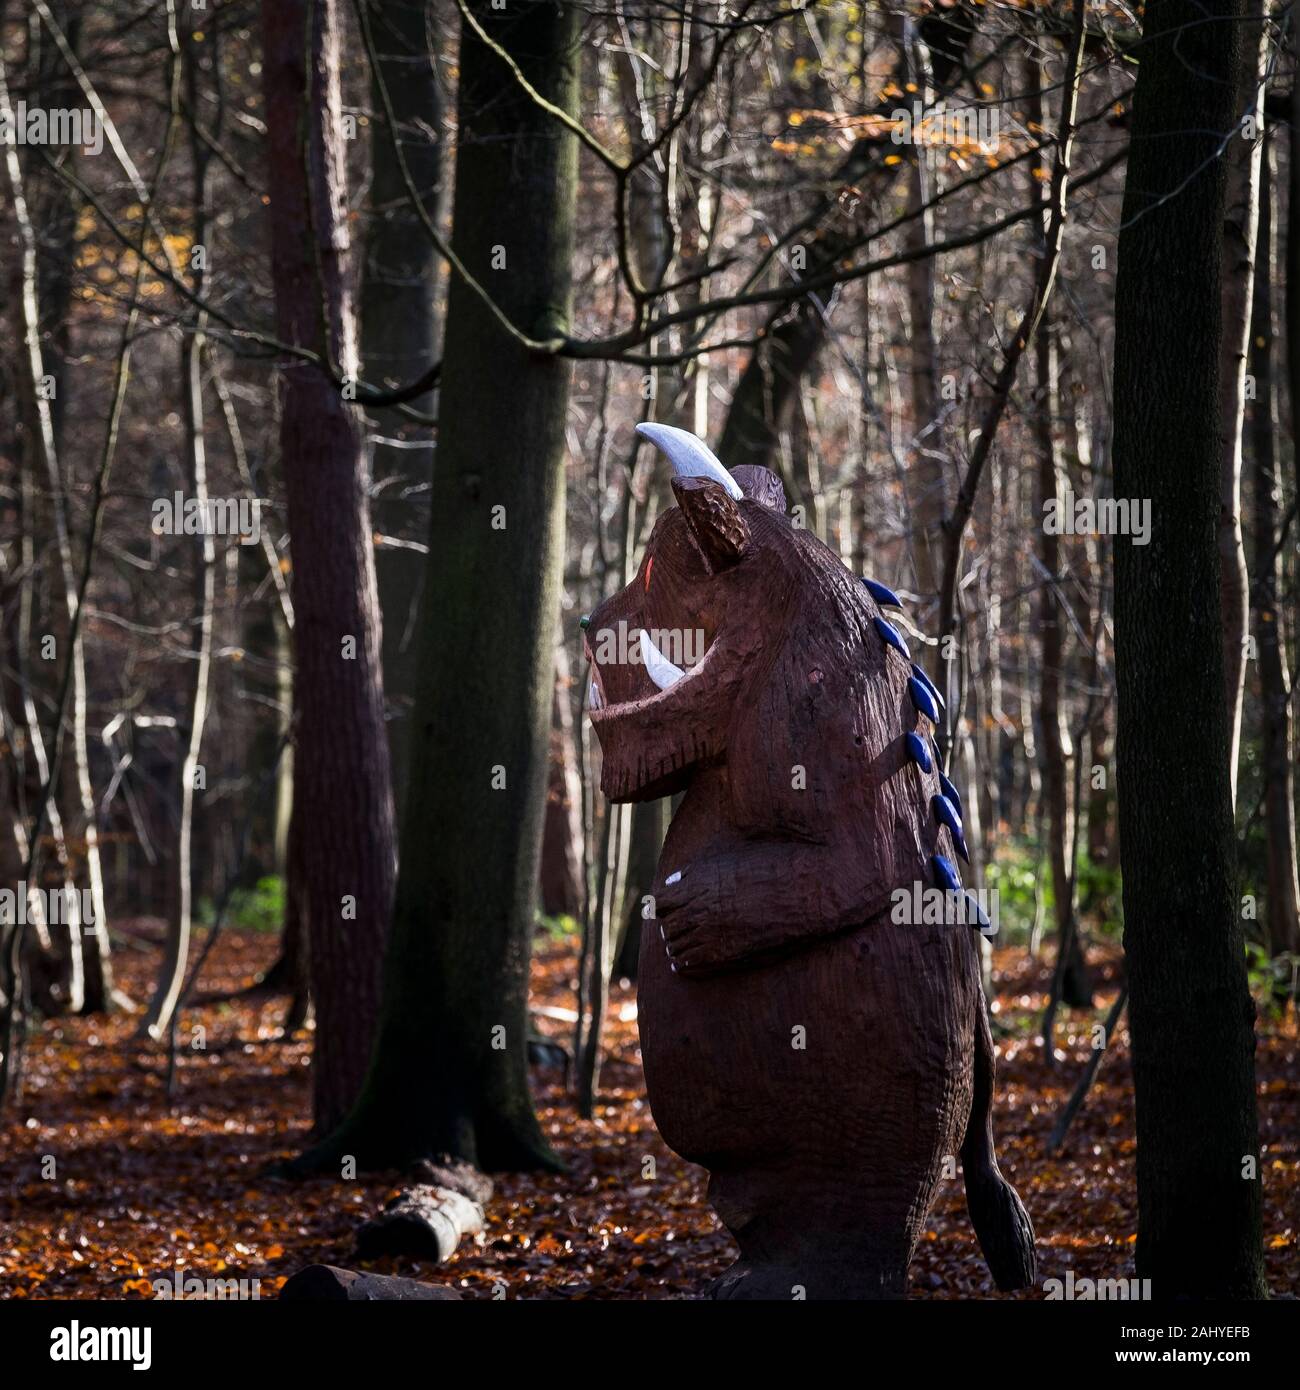 A wooden carved statue of The Gruffalo in an autumnal Thorndon Park North in Brentwood in Essex. Stock Photo